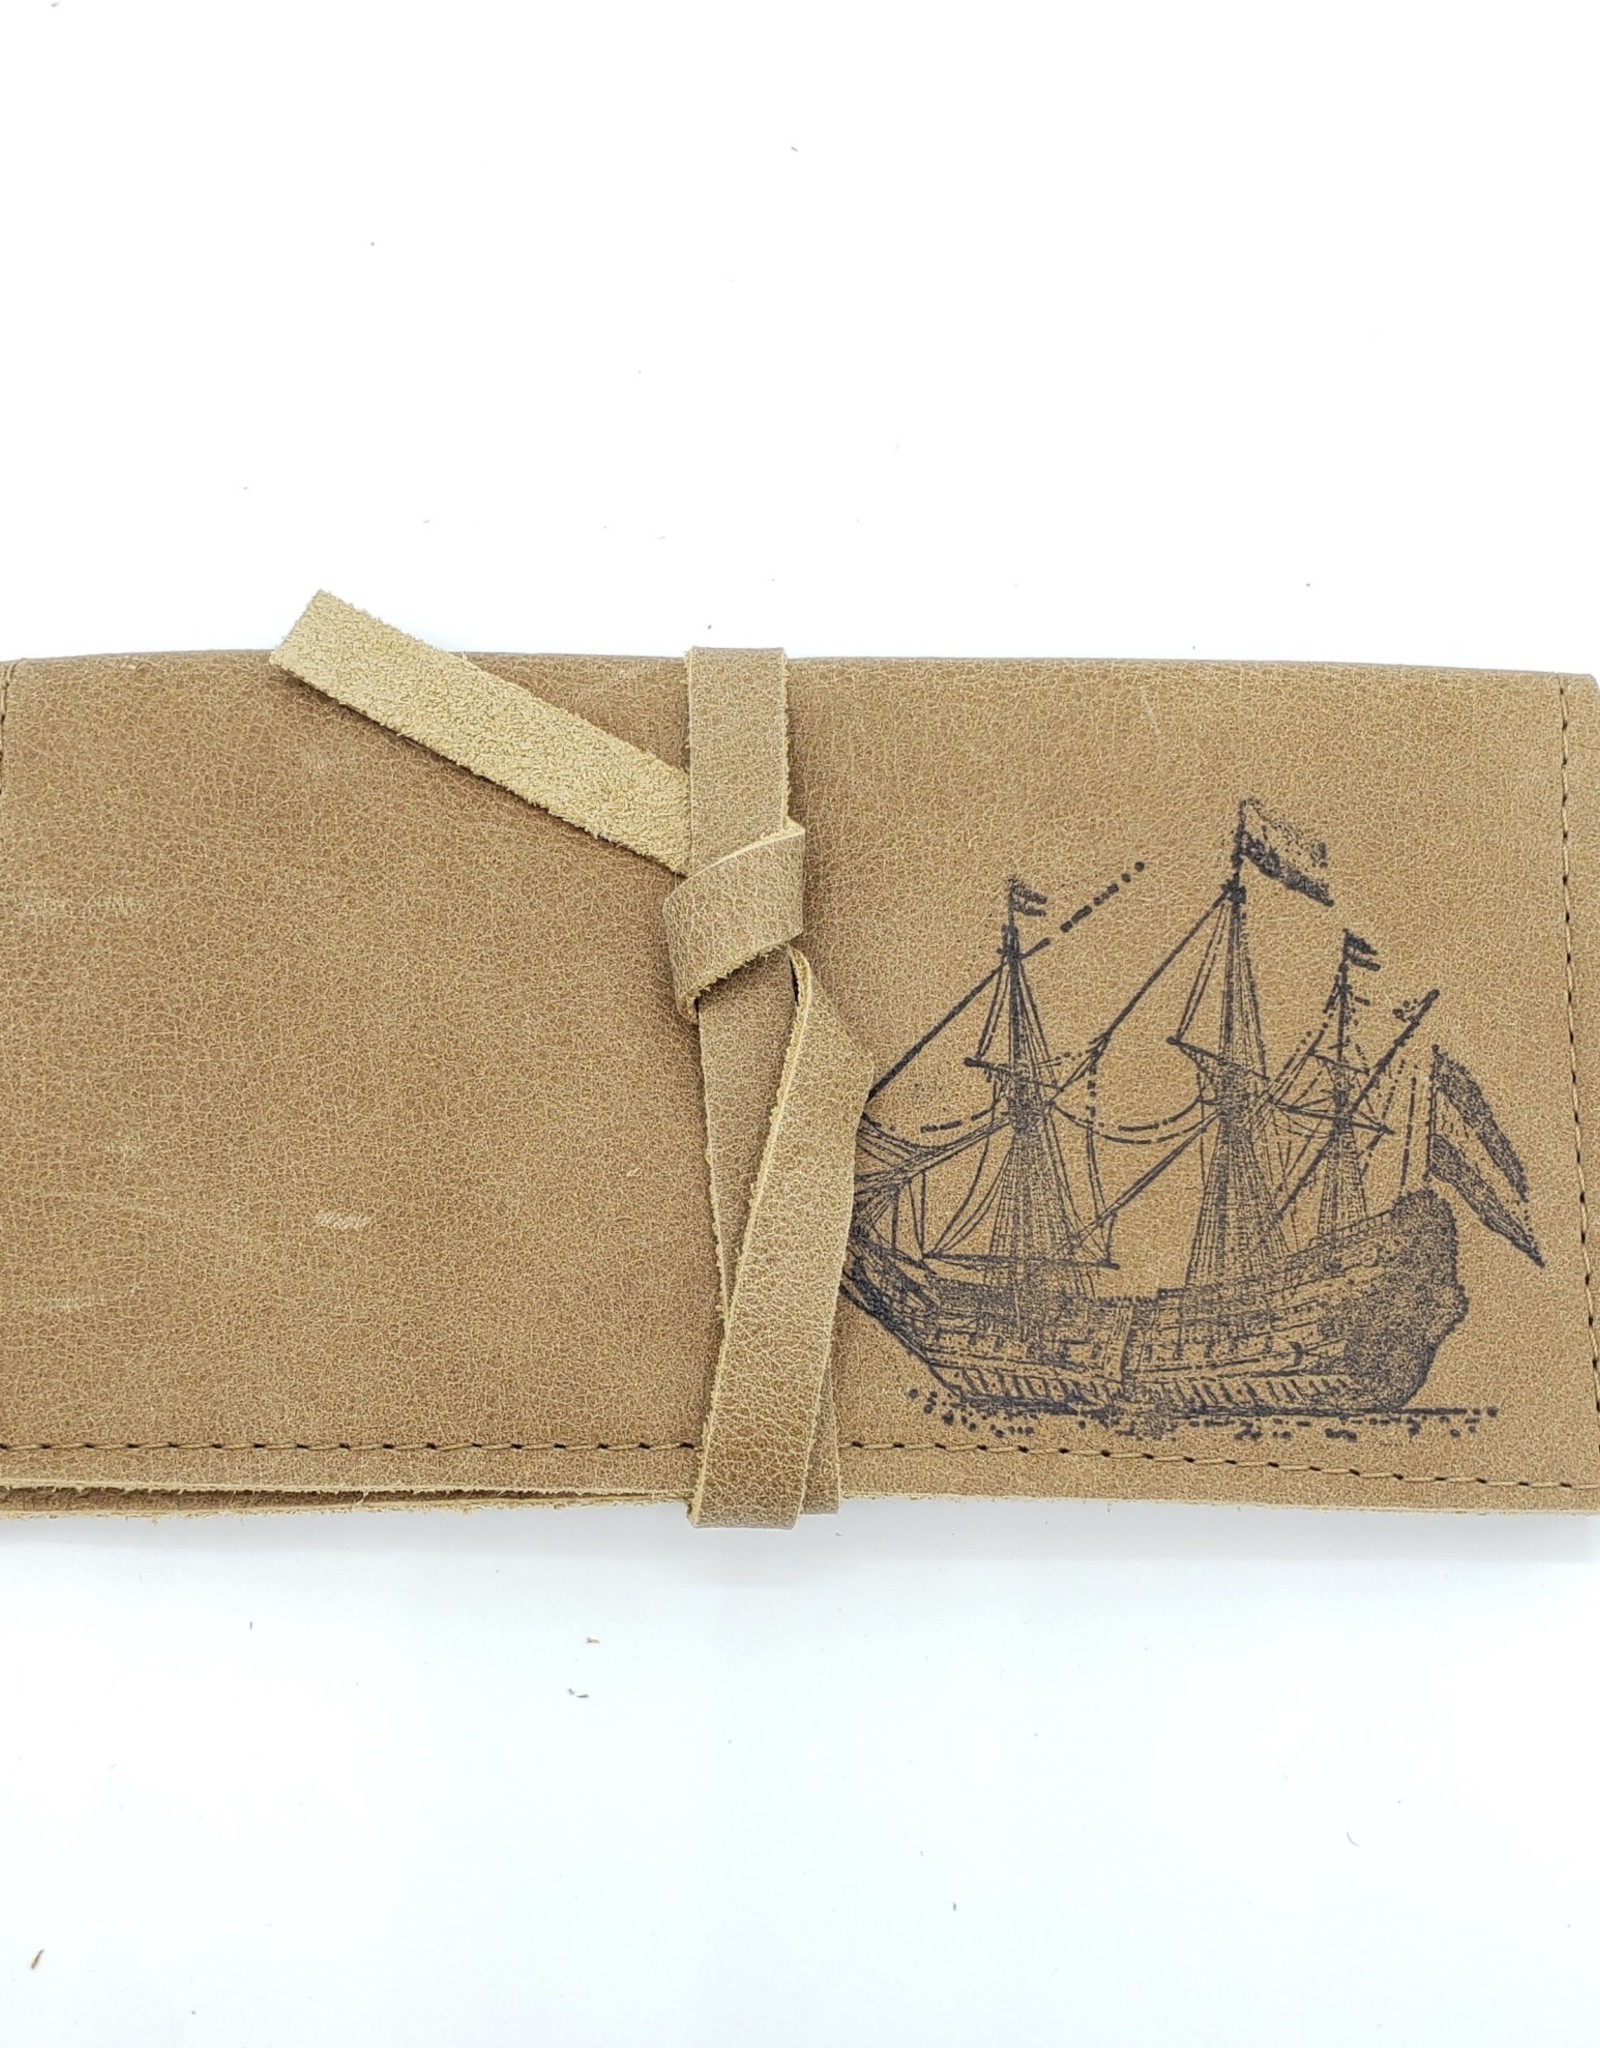 In Blue Handmade Pirate Ship - Leather Pocketbook Wallet